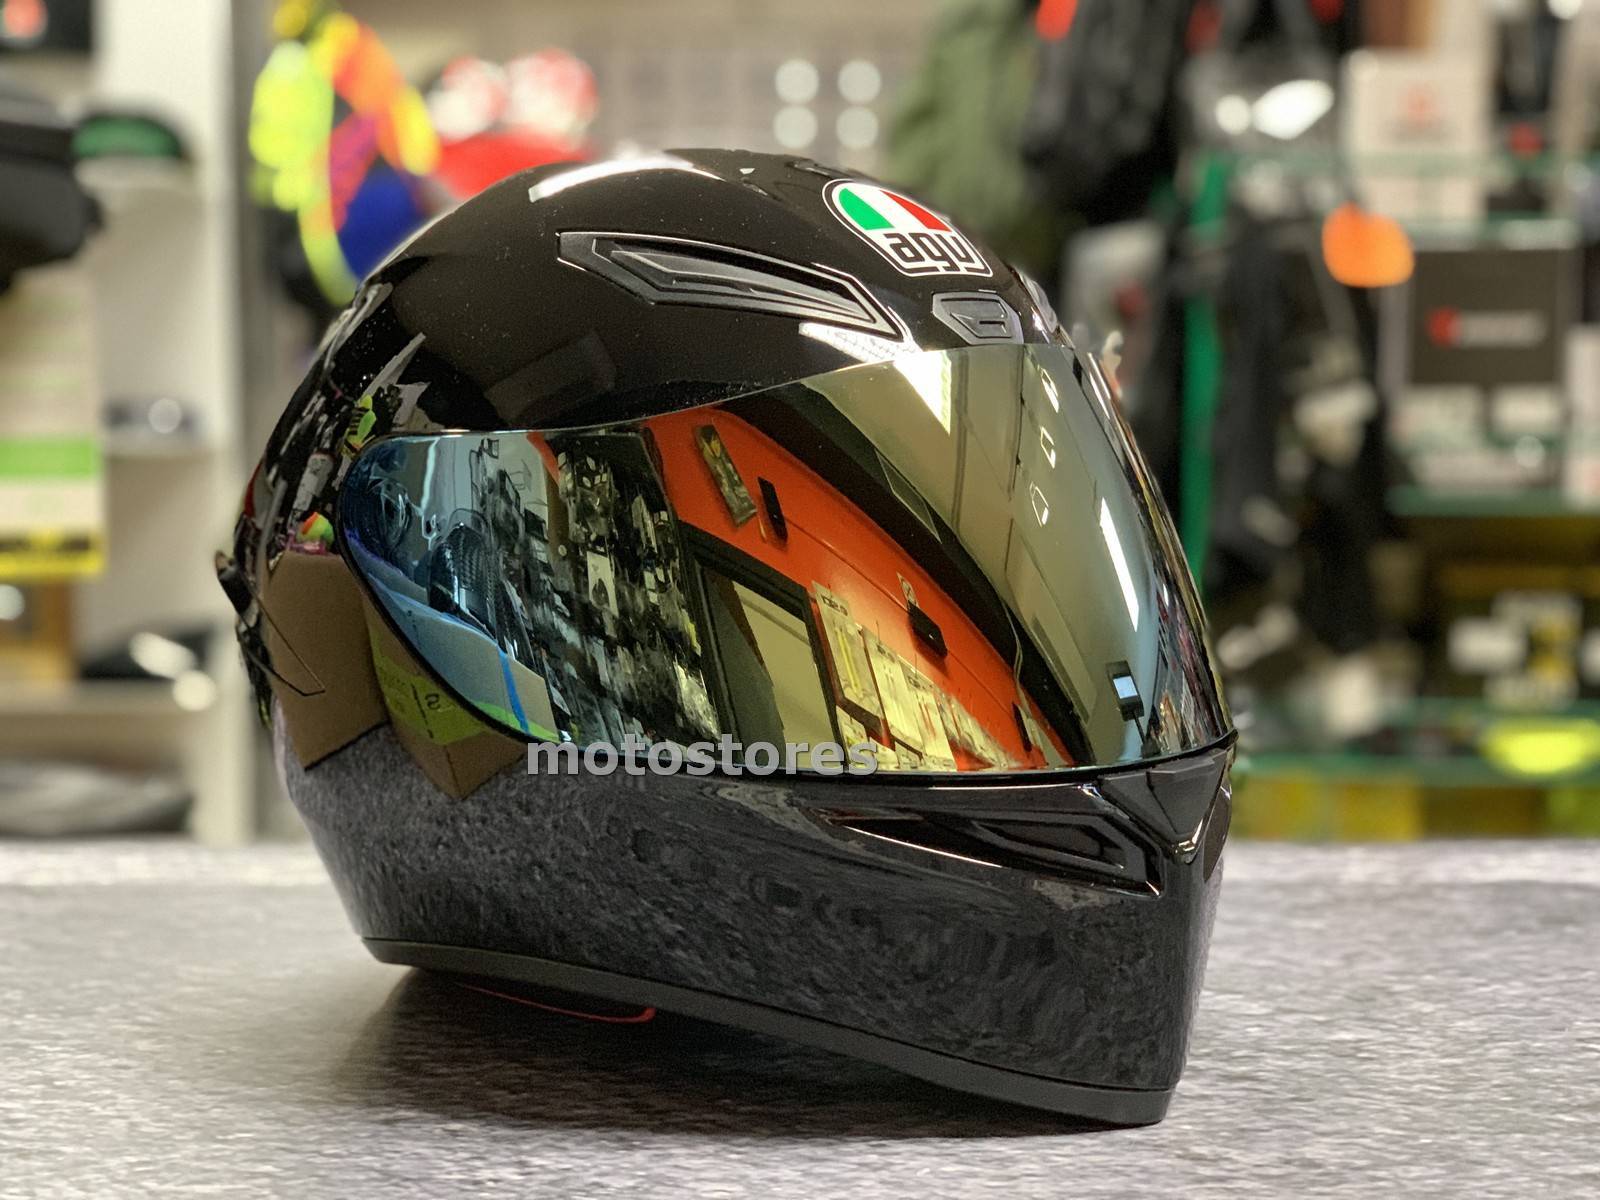 Visera Casco Agv K1 K5 K5s K3 Sv S4-sv Stealth-Sv GT-2 Aftermarket Negro Oscuro 